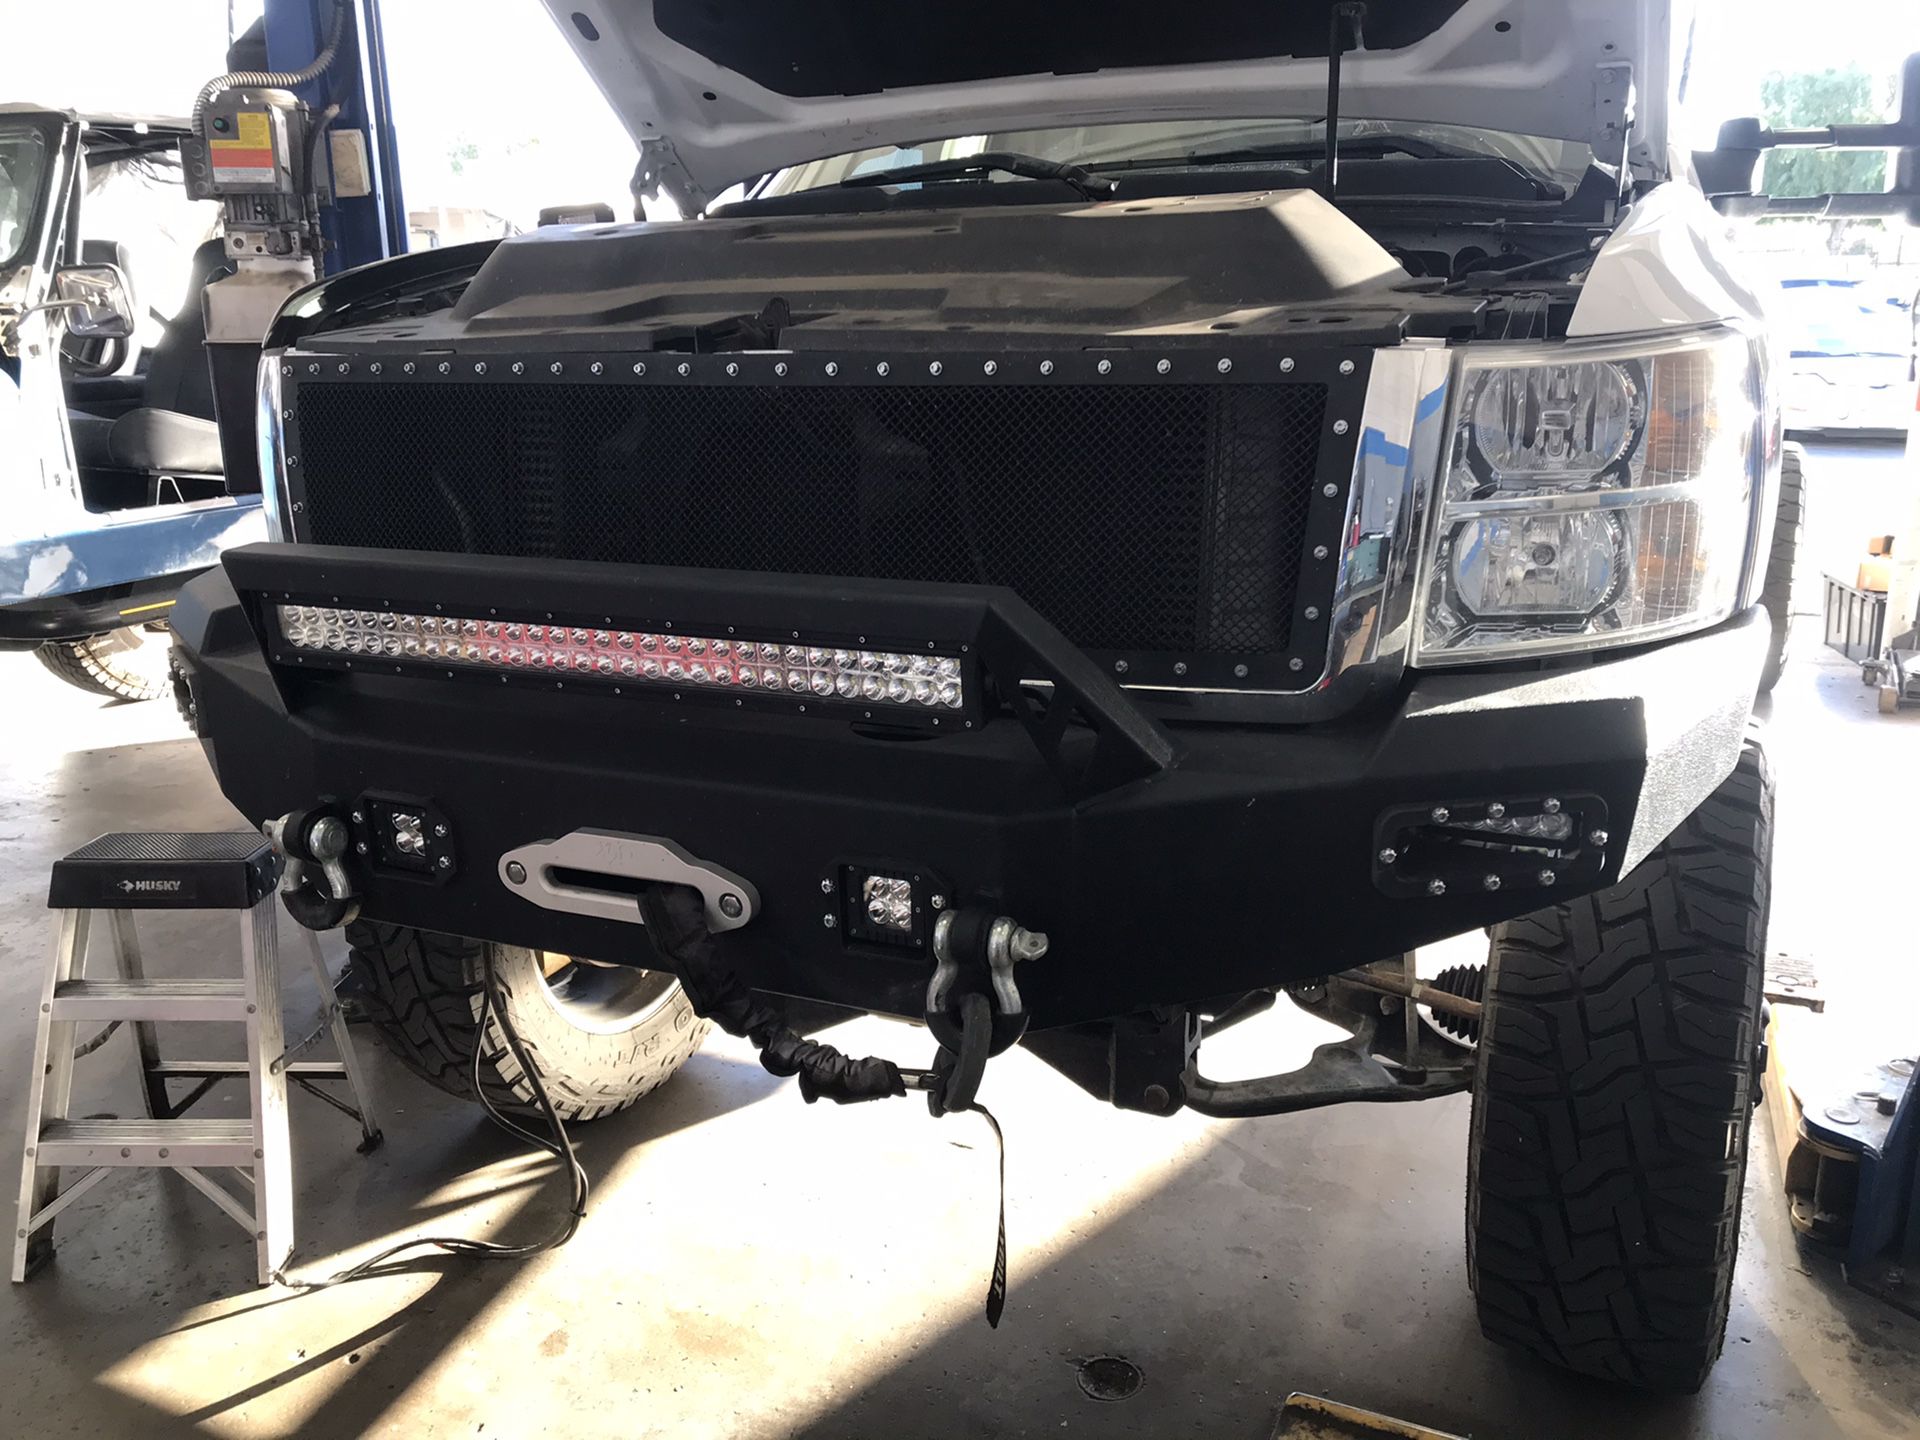 Front aftermarket heavy duty bumper with LED lighting and Smitty built Winch and control!!